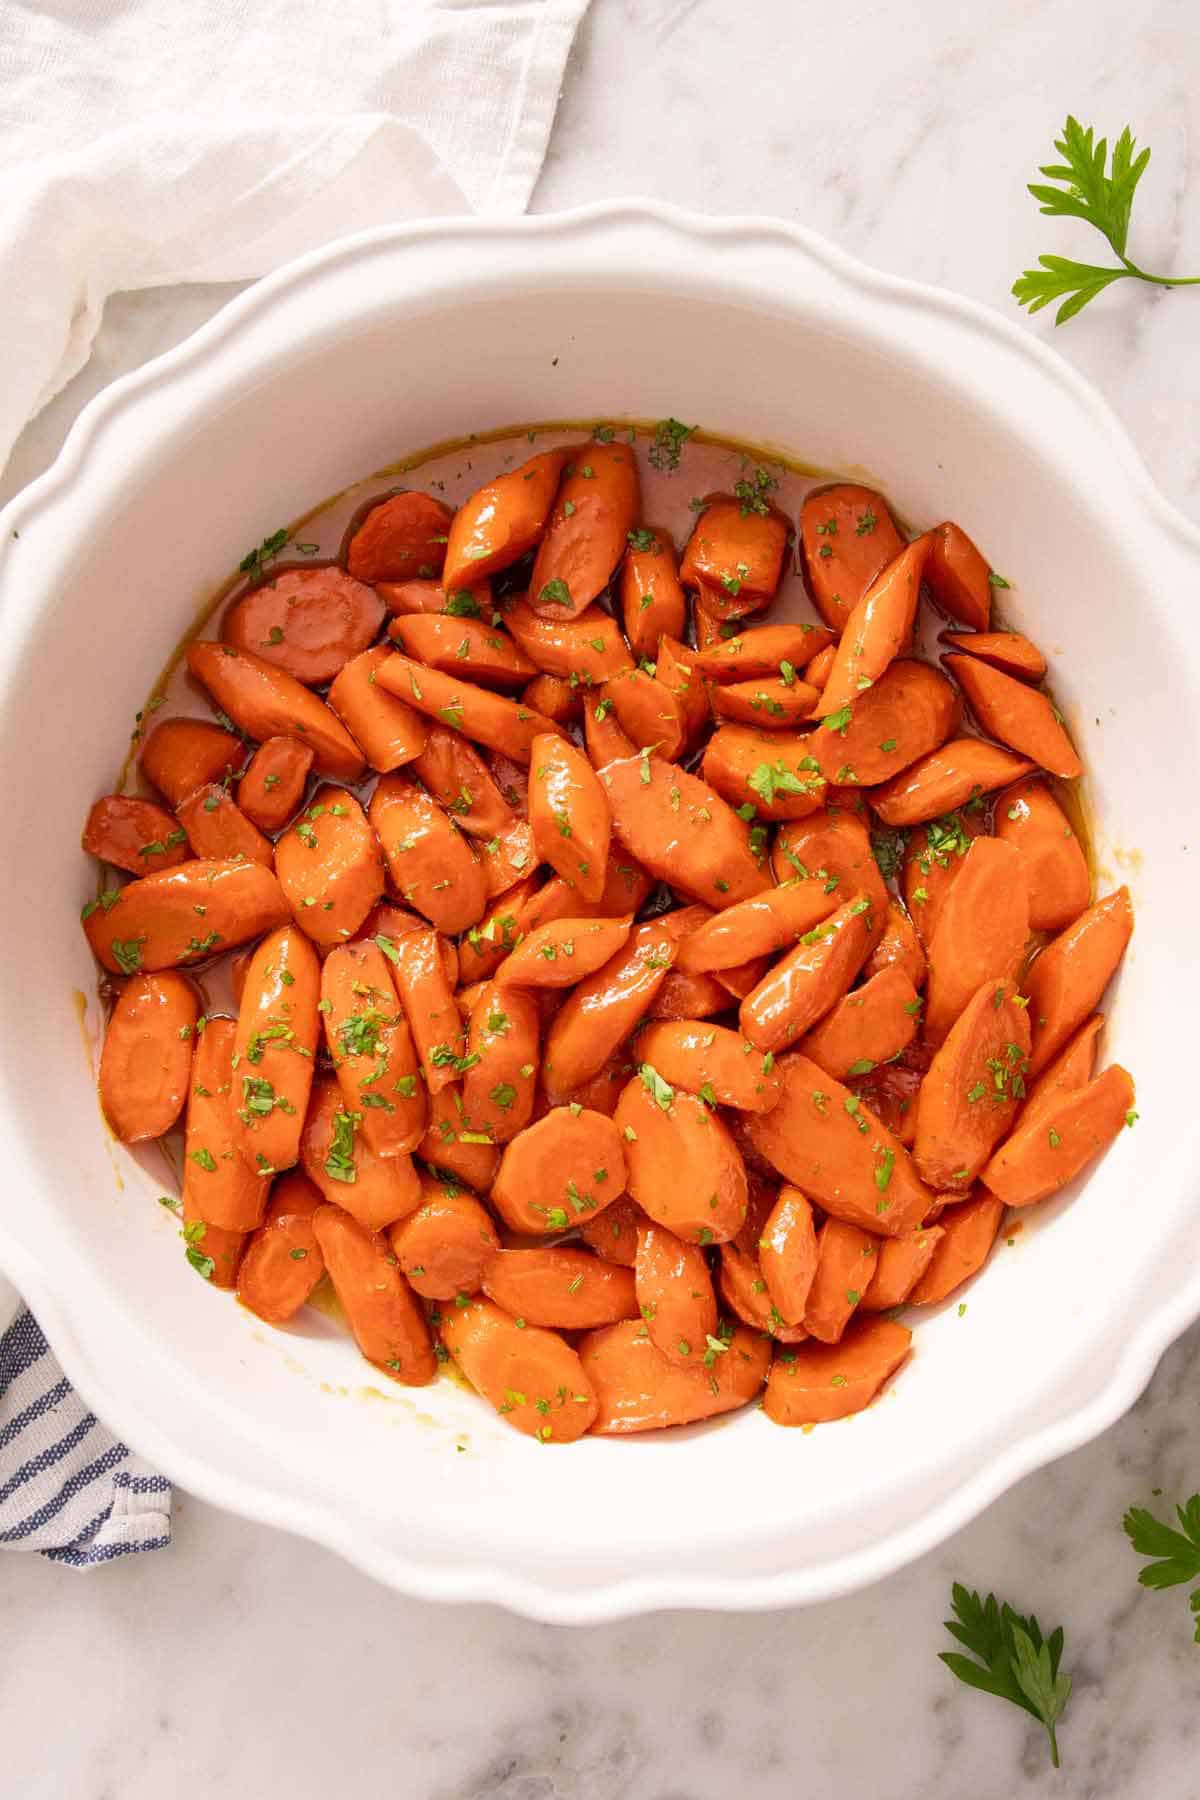 Overhead view of a bowl of glazed carrots topped with chopped parsley.